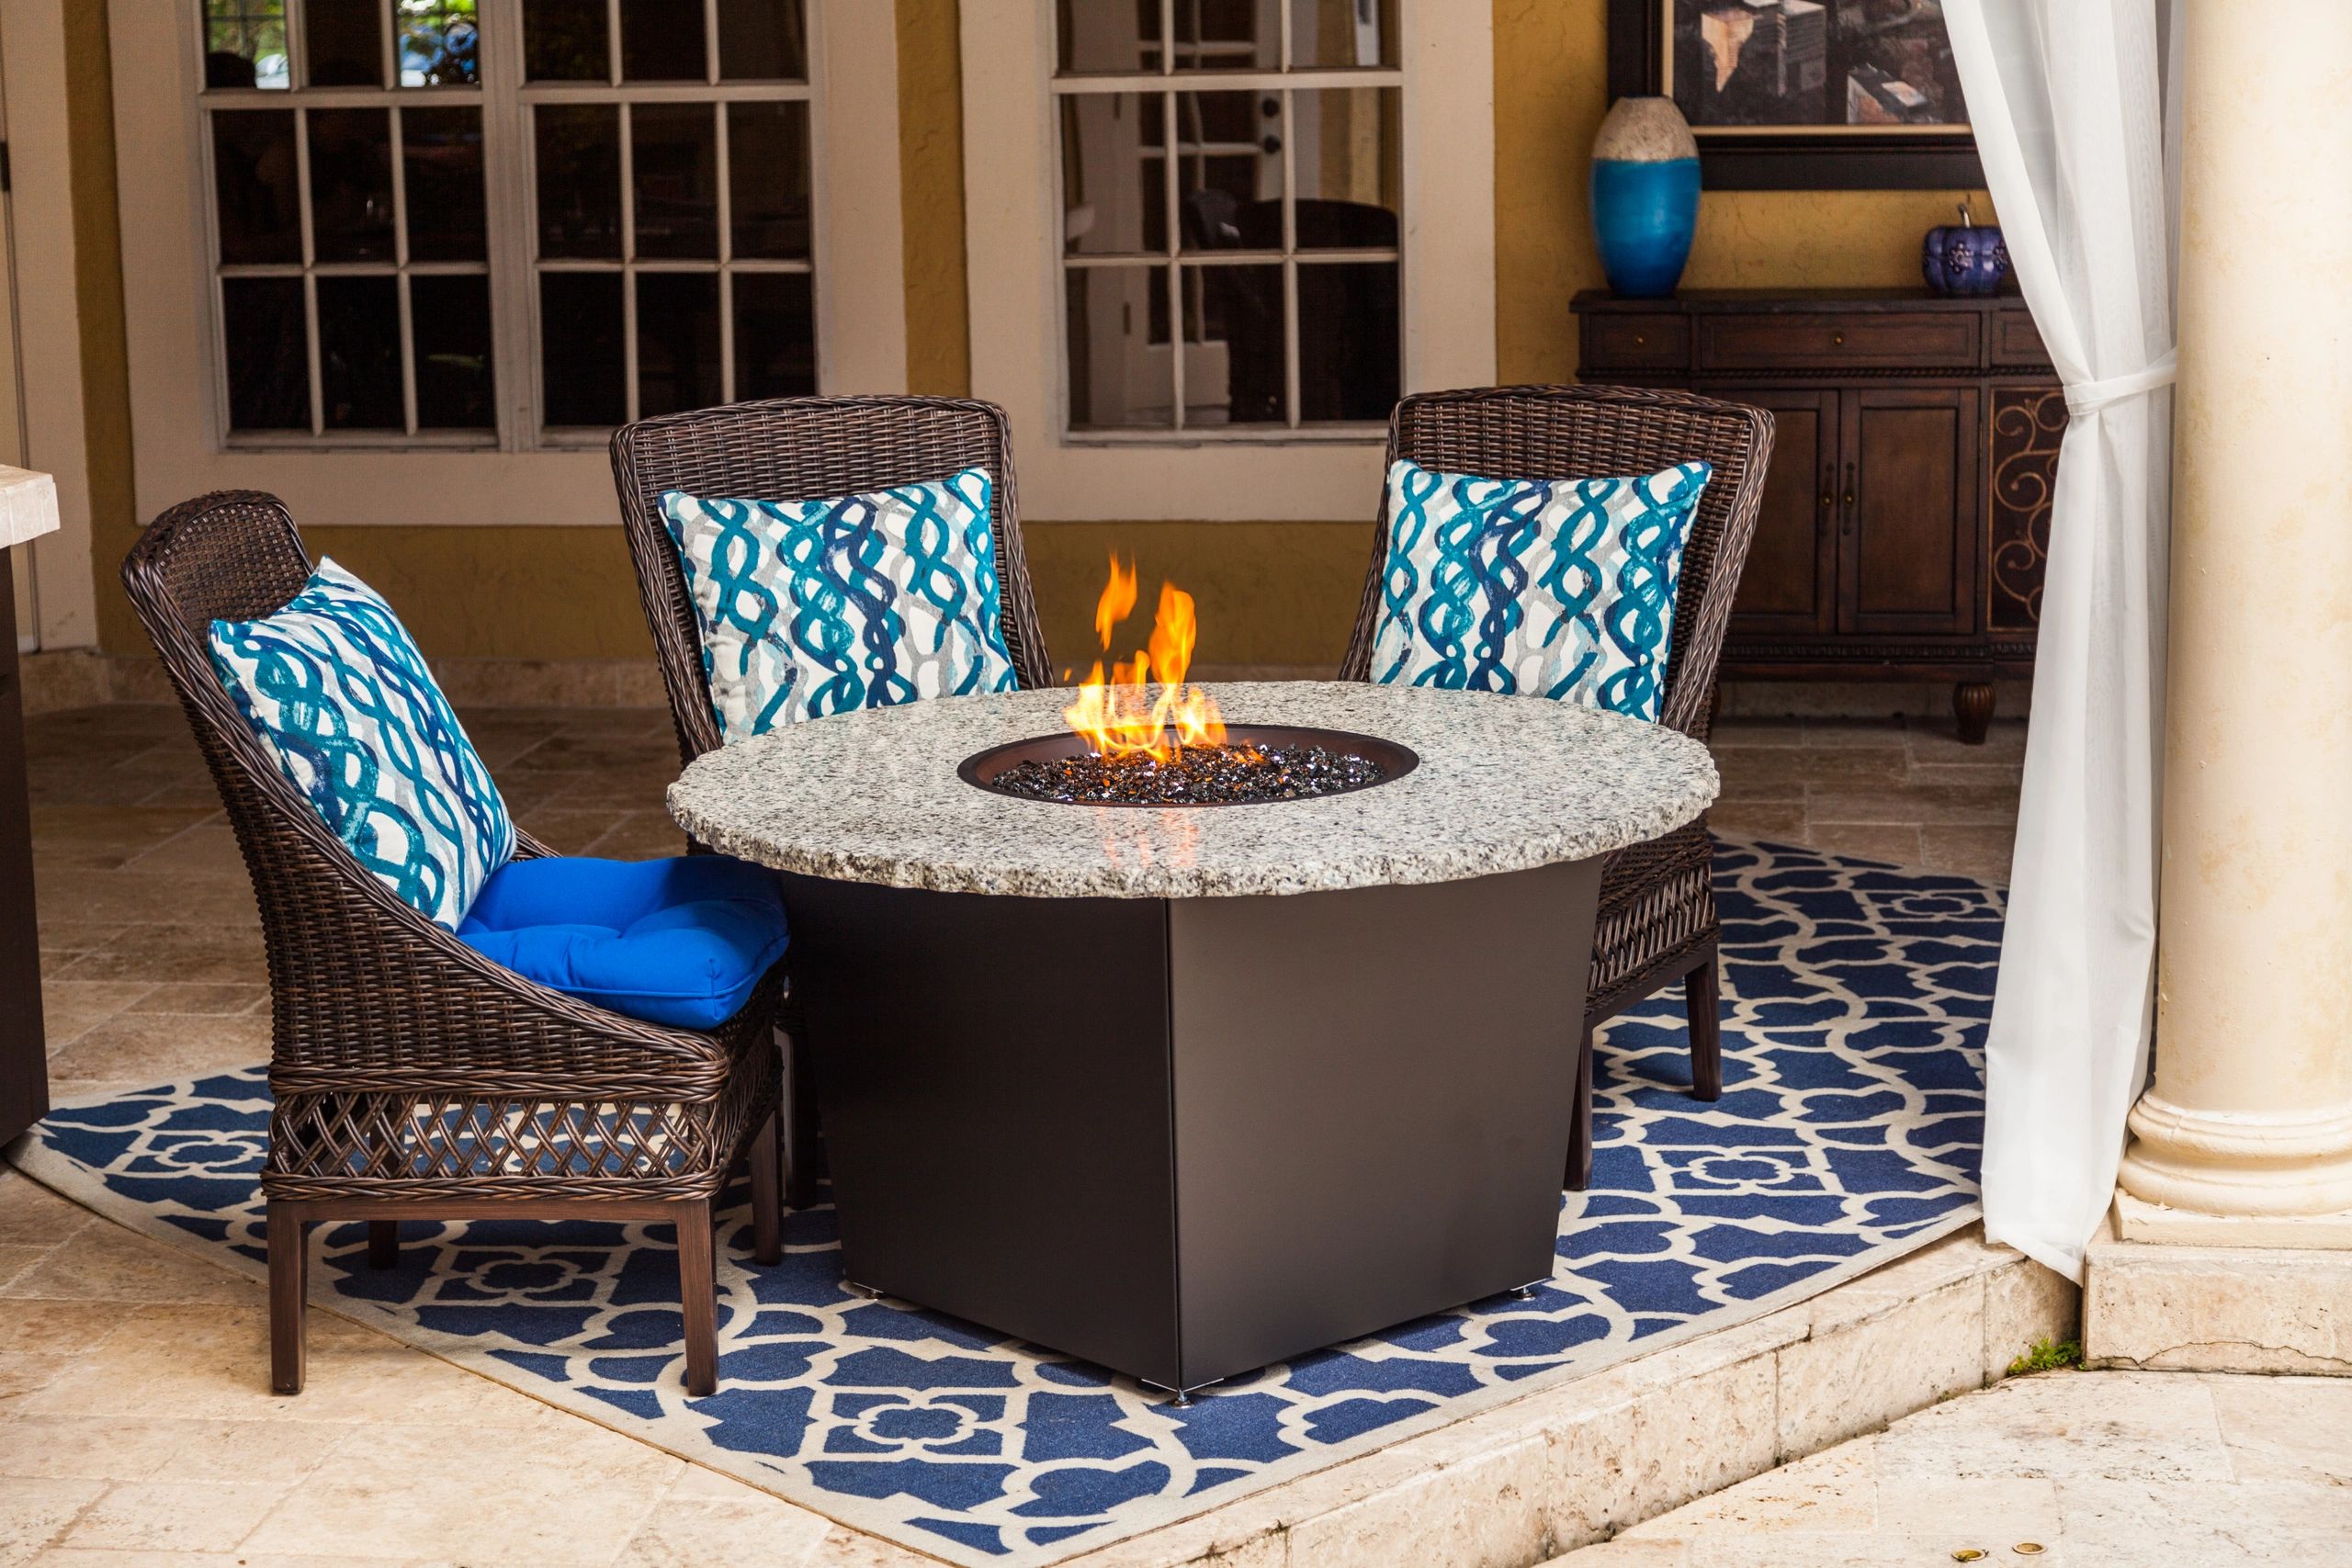 Round gas fire pit table with fire in an outdoor setting